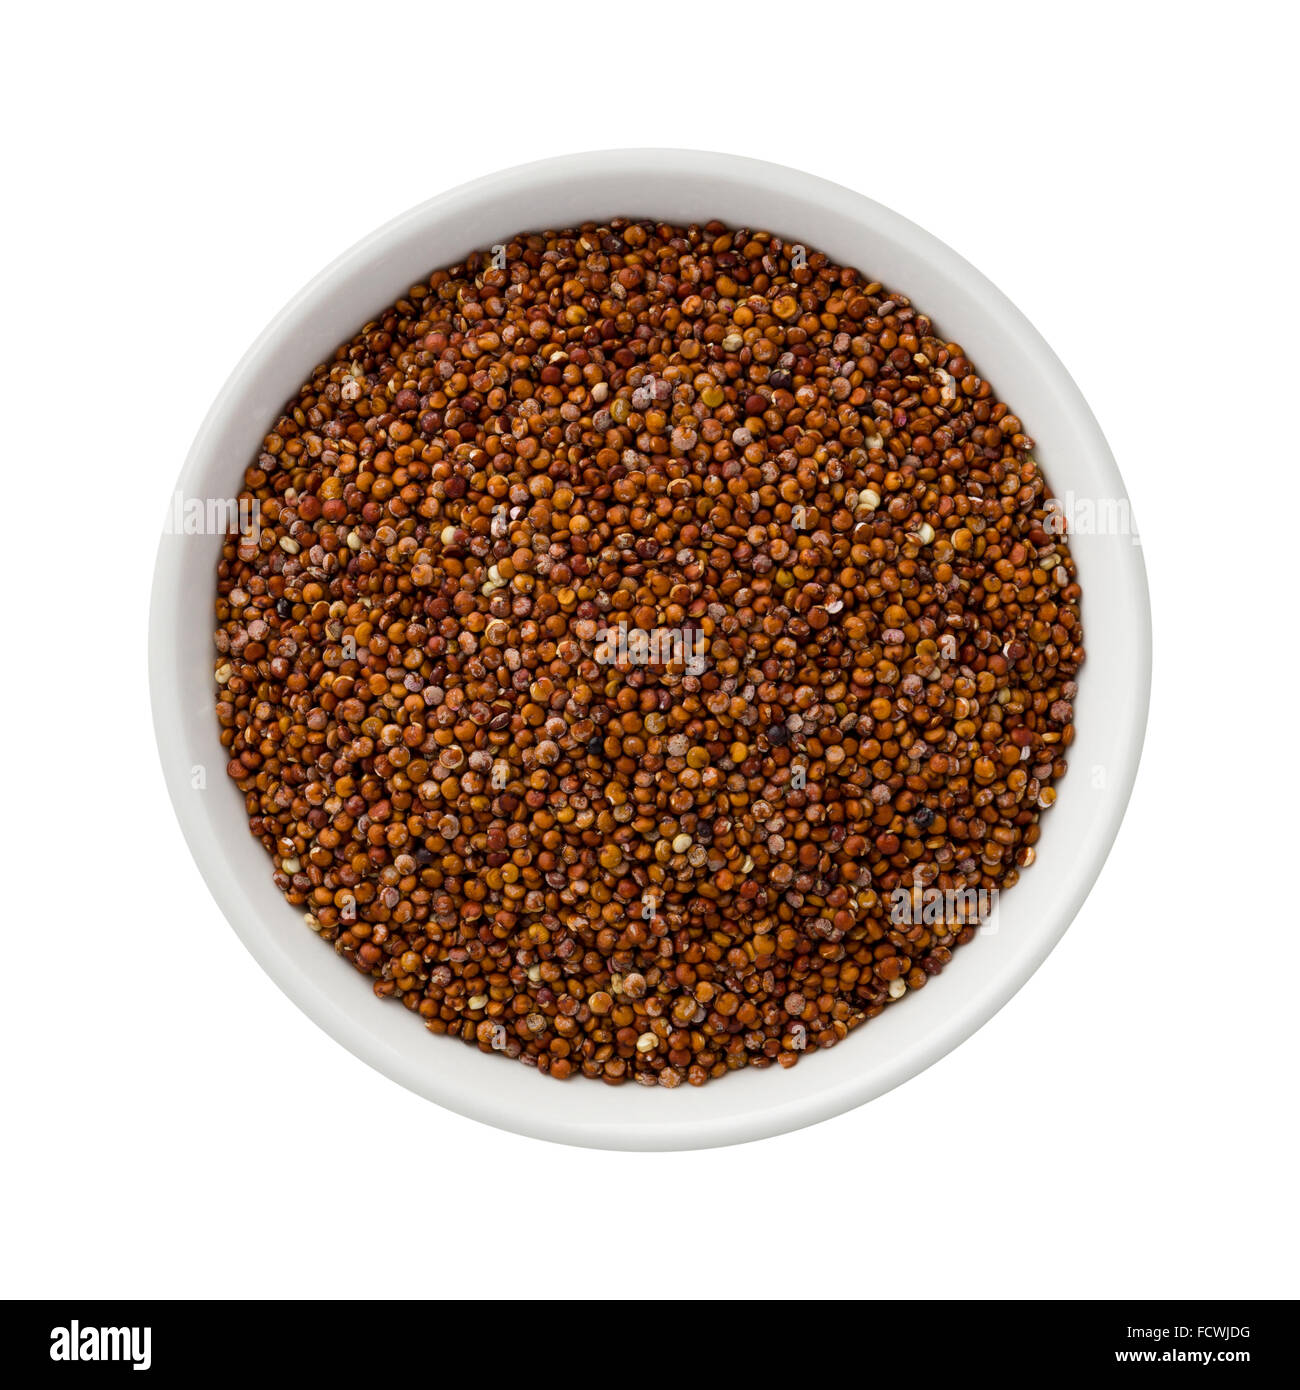 Royal Red Quinoa in a white ceramic bowl. The image is a cut out, isolated on a white background. Stock Photo